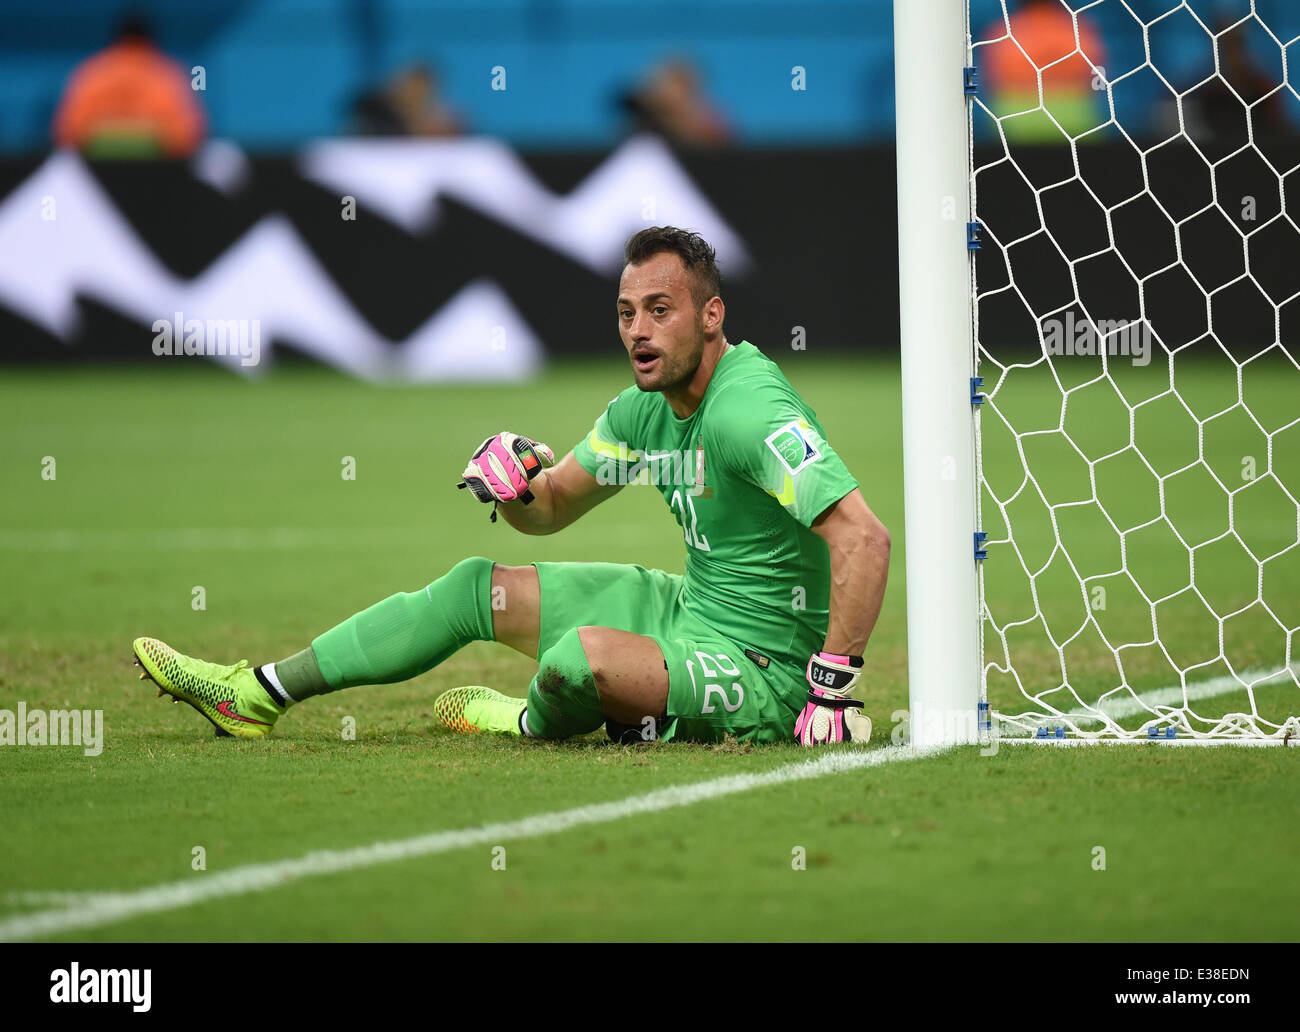 Manaus, Brazil. 22nd June, 2014. Goalkeeper Beto of Portugal sits on the pitch during the FIFA World Cup 2014 group G preliminary round match between the USA and Portugal at the Arena Amazonia Stadium in Manaus, Brazil, 22 June 2014. Photo: Marius Becker/dpa/Alamy Live News Stock Photo